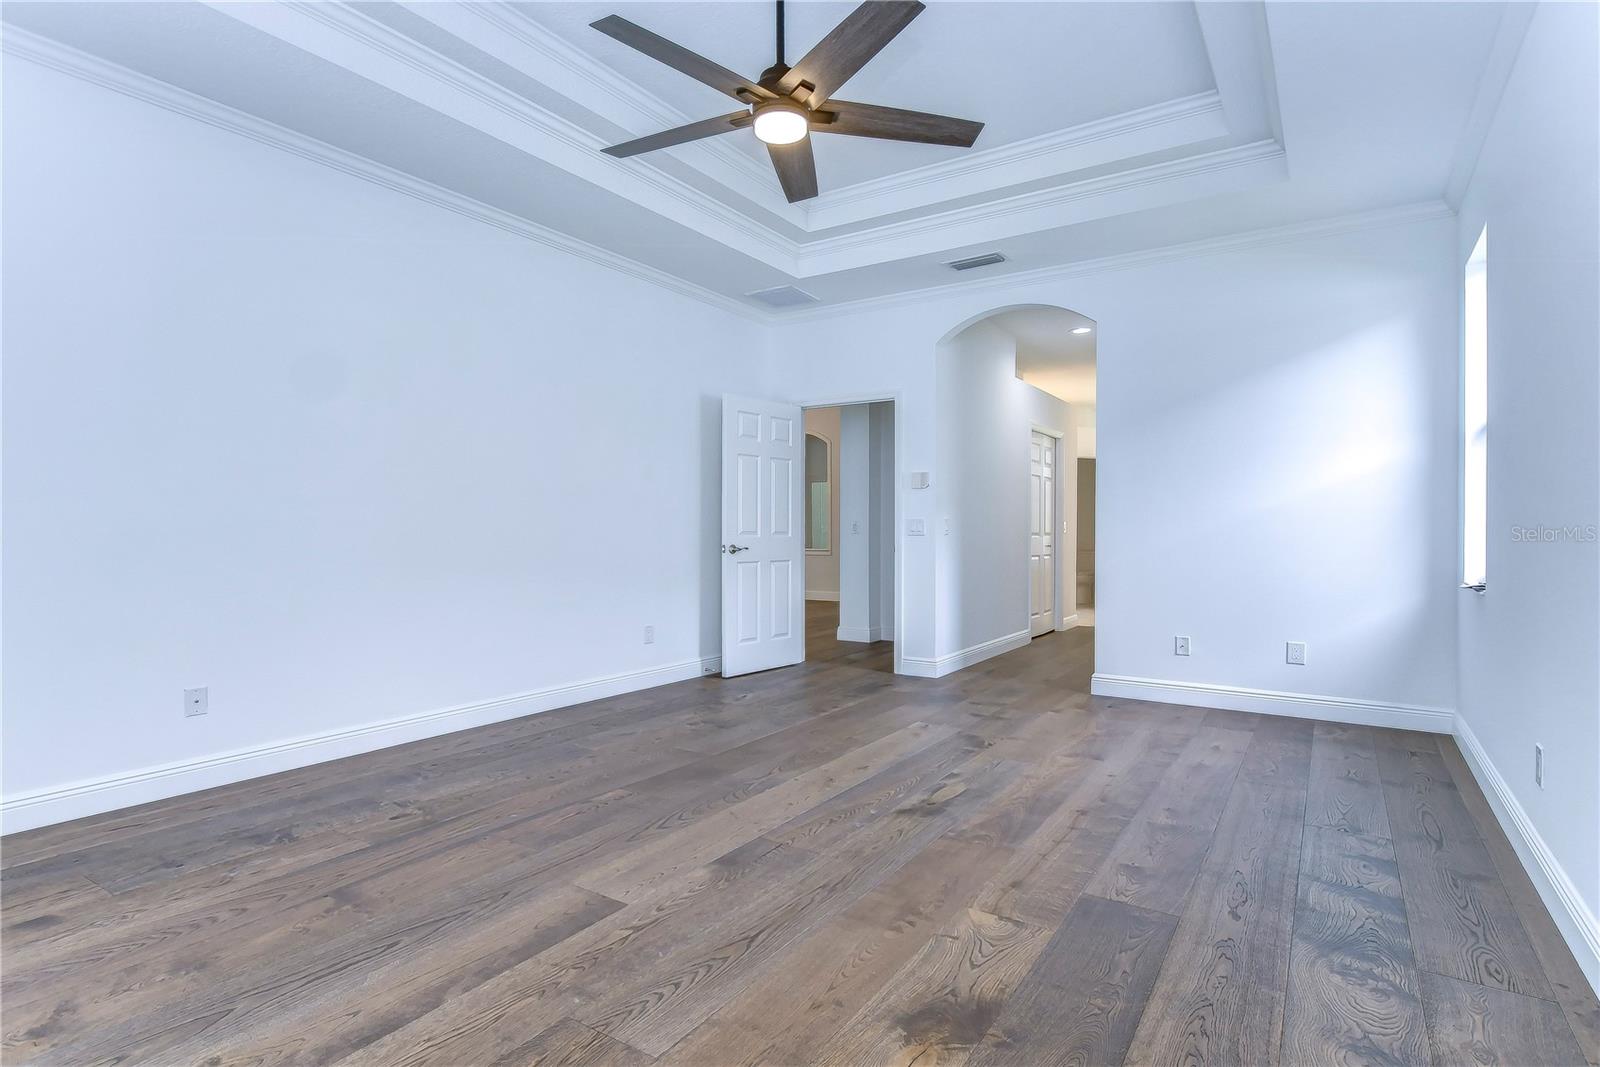 Bathed with natural light from the windows, beautiful hardwood floors and tray ceiling!